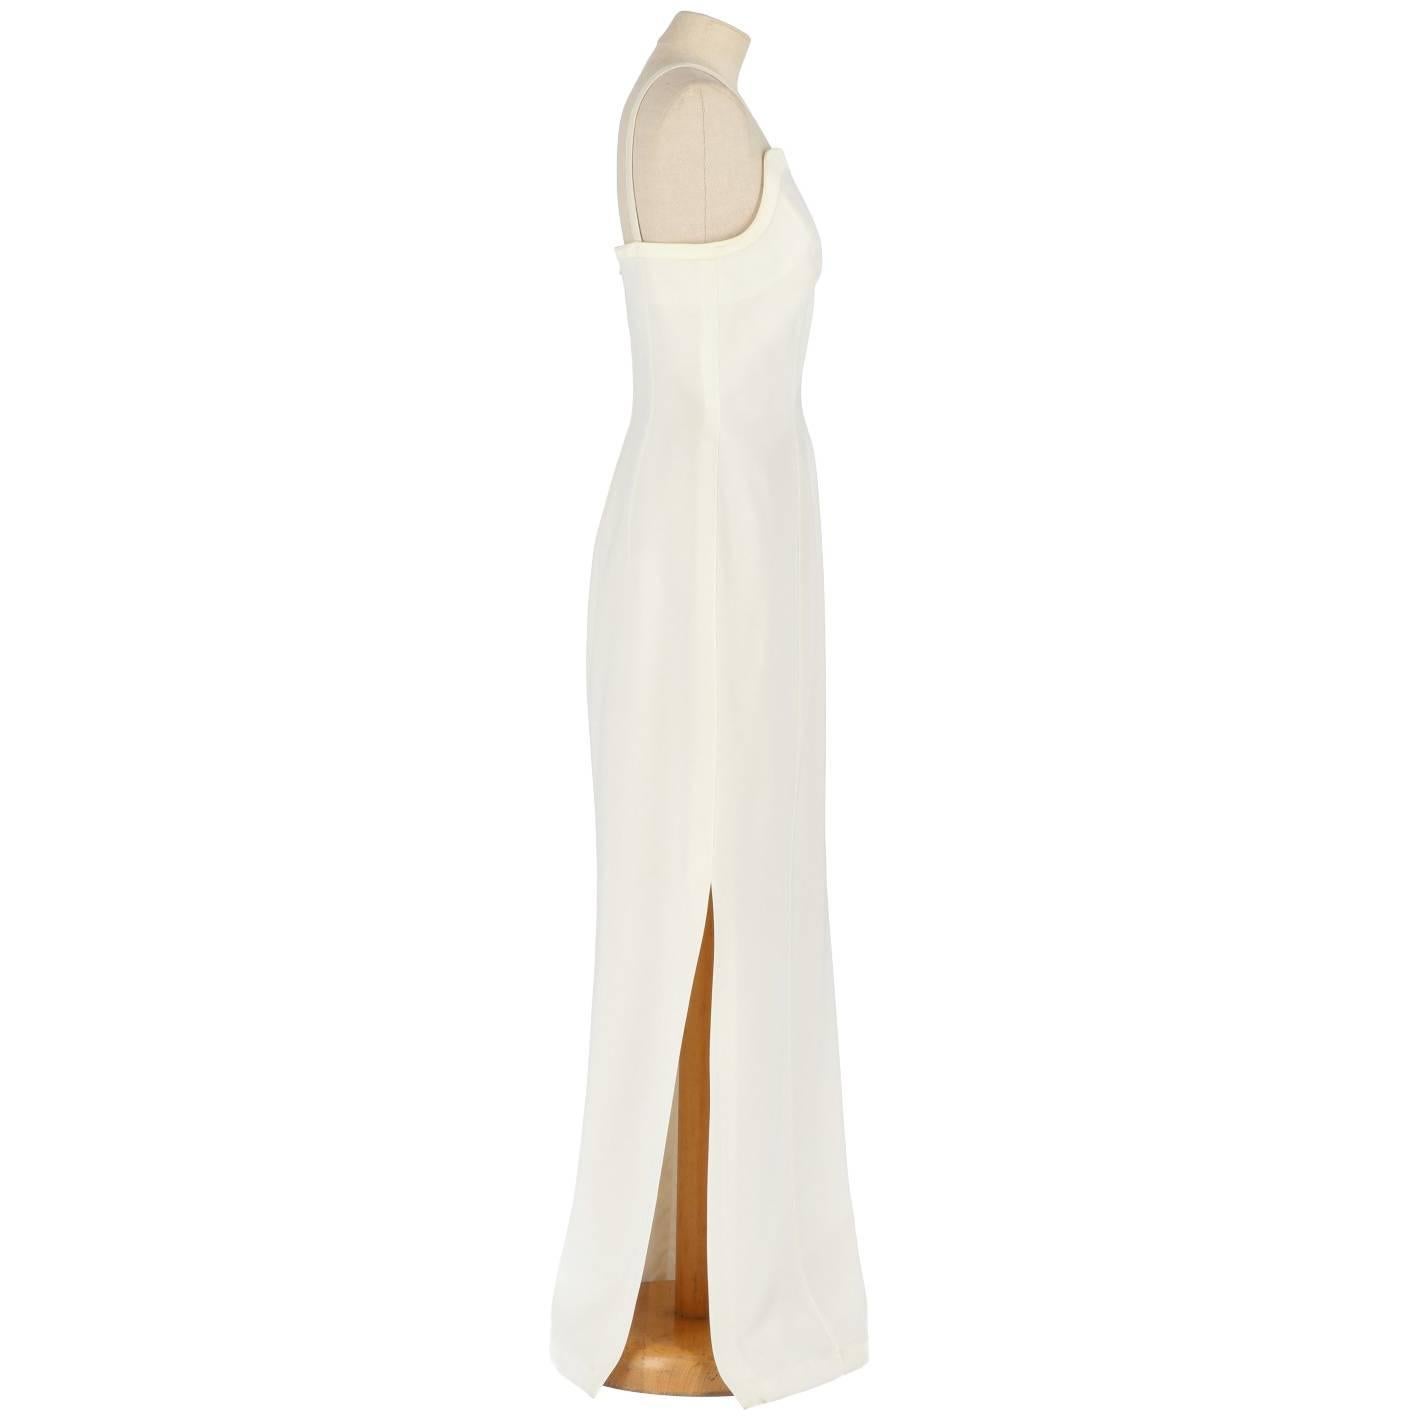 Beautiful Thierry Mugler wedding dress in ivory white fabric. It features a charachteristic 
interwave of shoulder straps on the chest and deep rip on the skirt. The item comes with its original tag. Zip closure on the back. The item is vintage, it